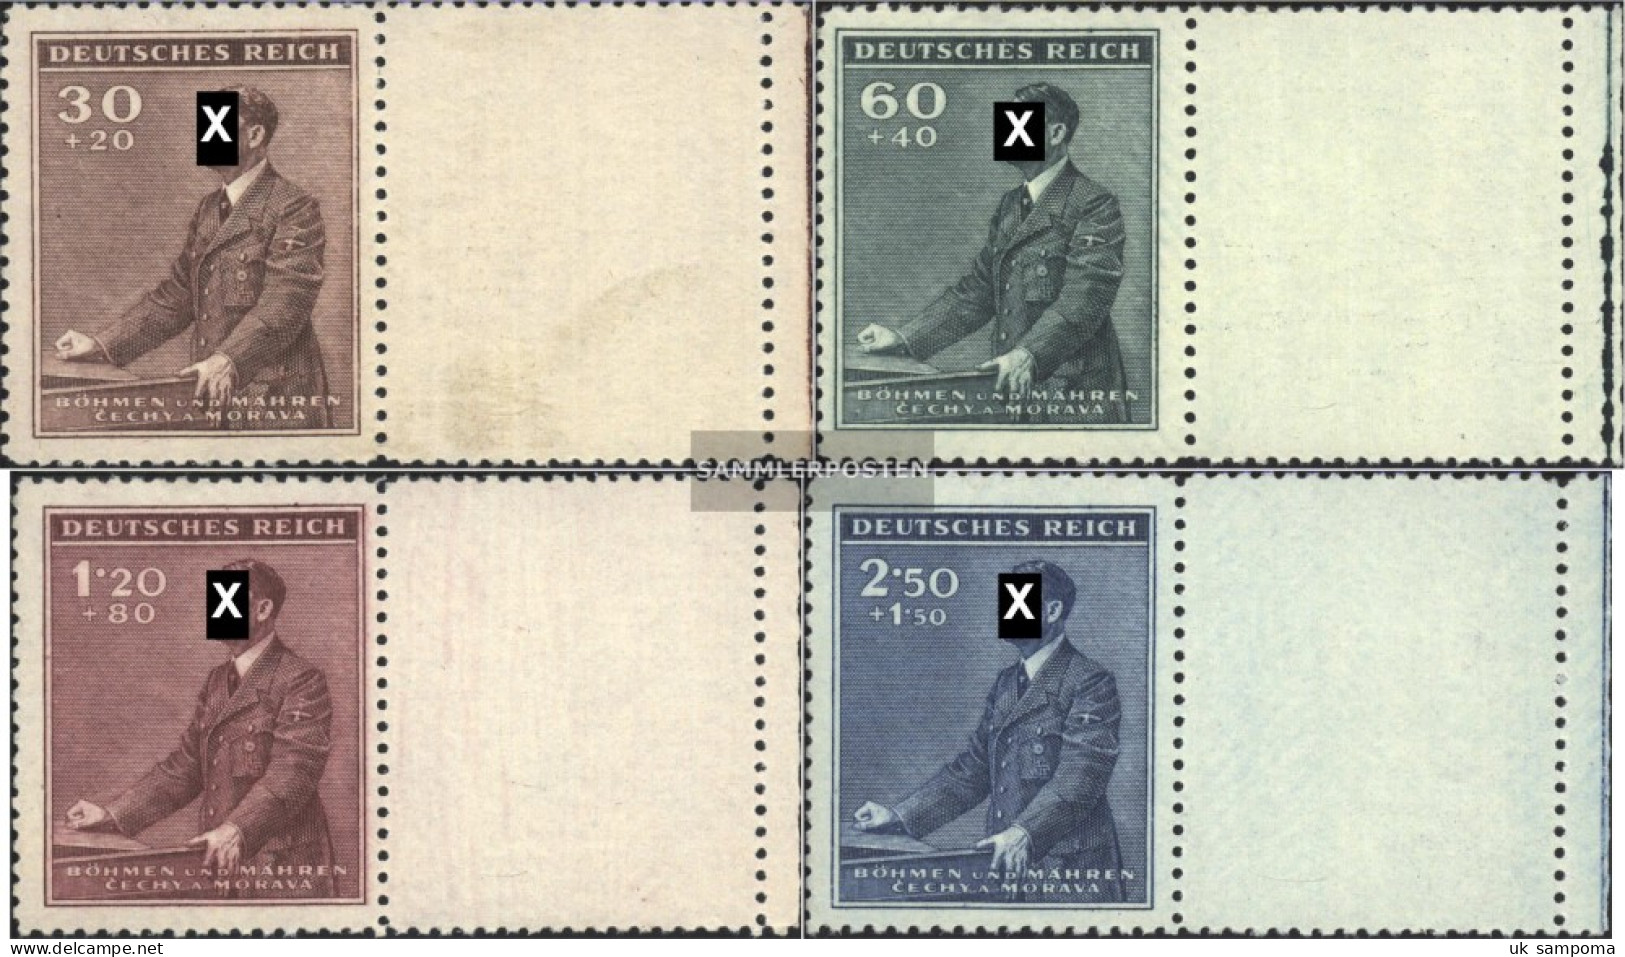 Bohemia And Moravia 85LW-88LW With Blank (complete Issue) Unmounted Mint / Never Hinged 1942 Hitler - Unused Stamps